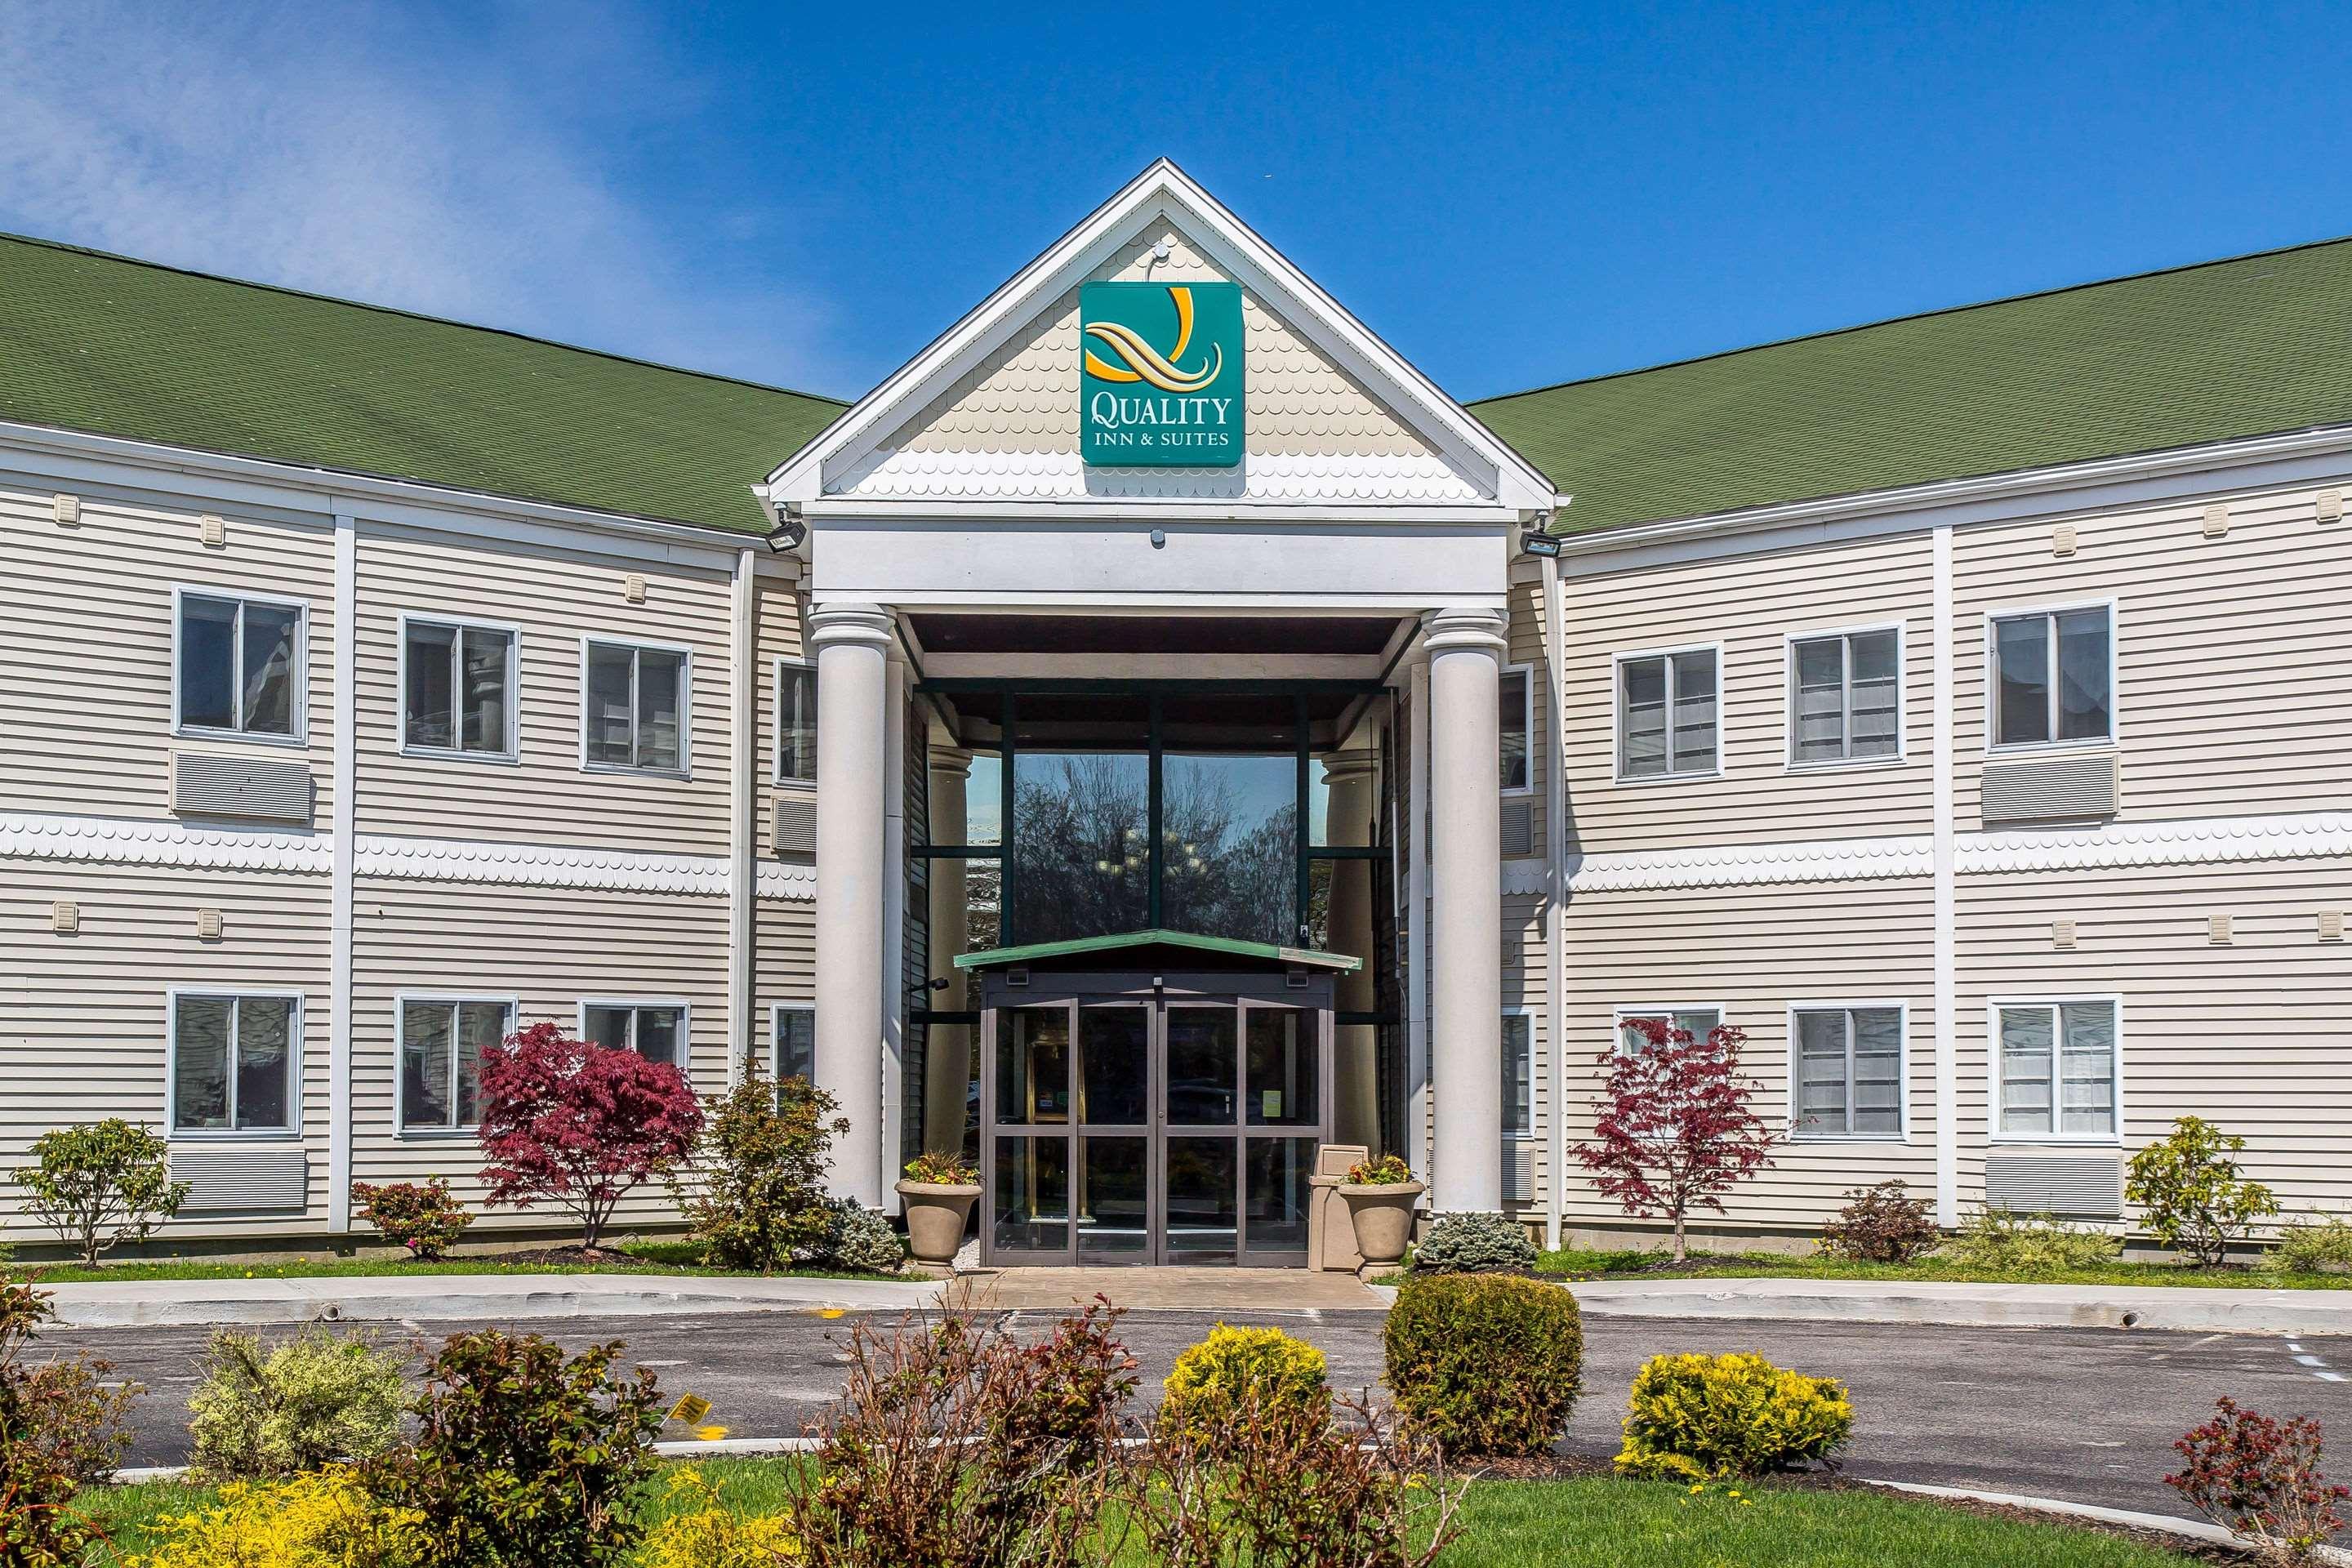 Quality Inn & Suites Middletown Newport